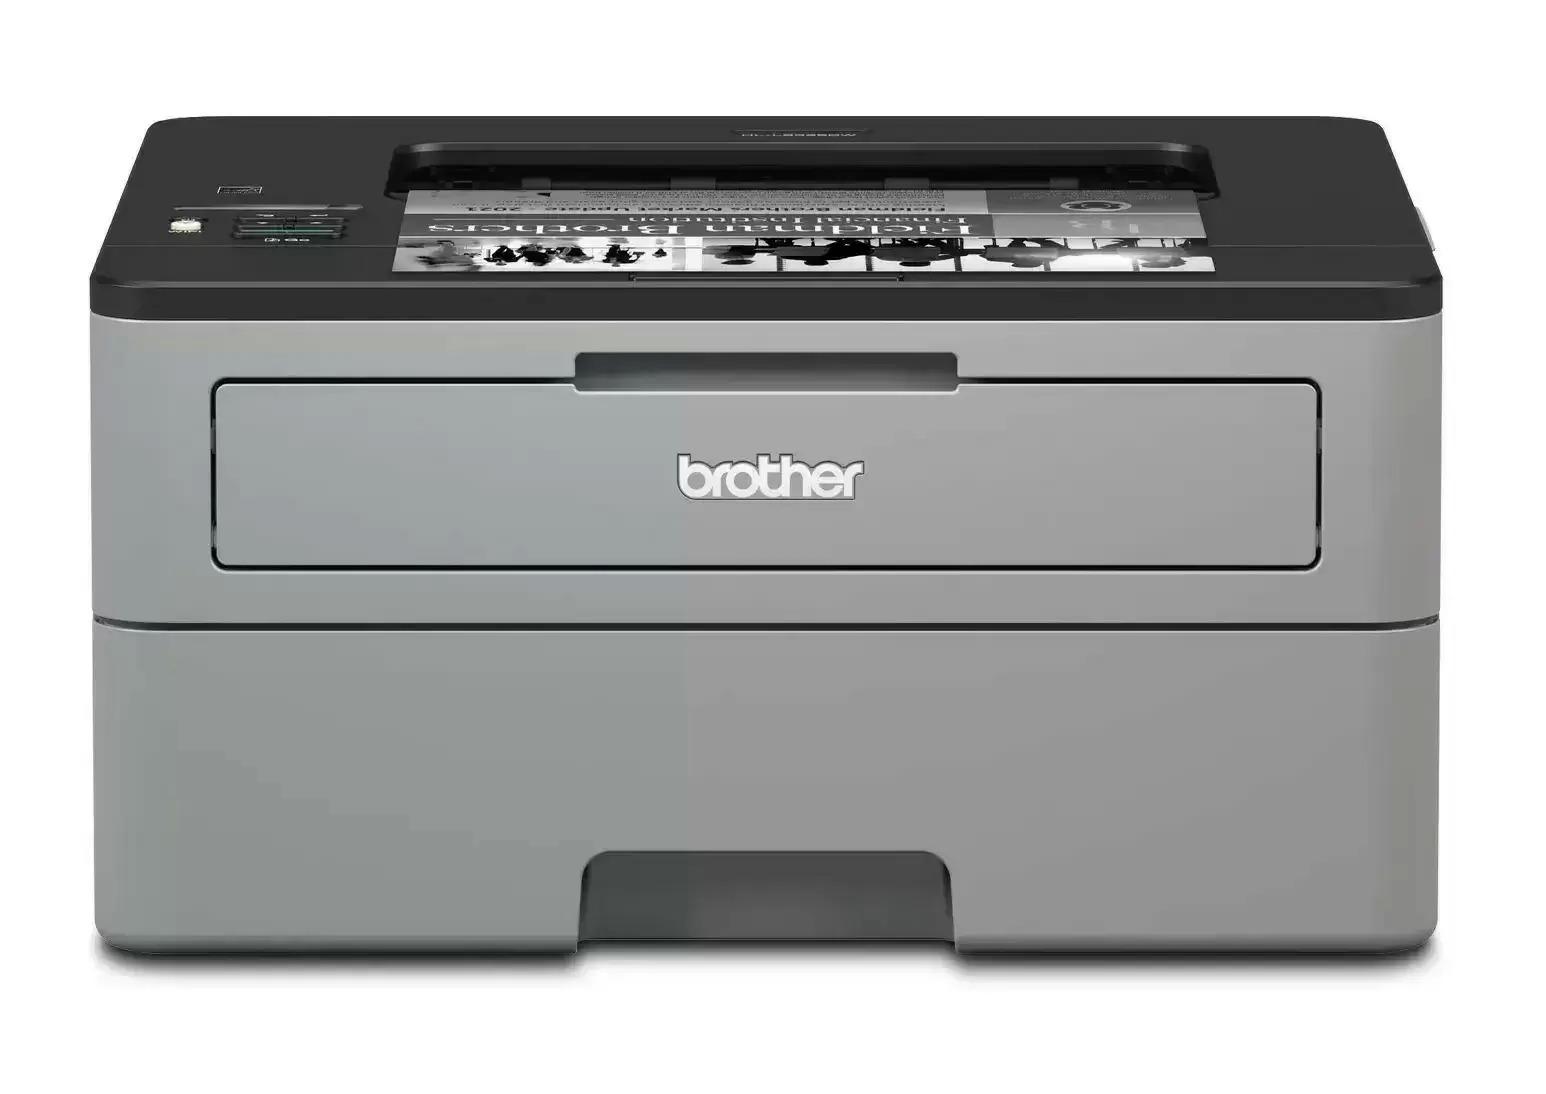 Brother HL-L2325DW Monochrome Wireless Duplex Laser Printer for $109.99 Shipped